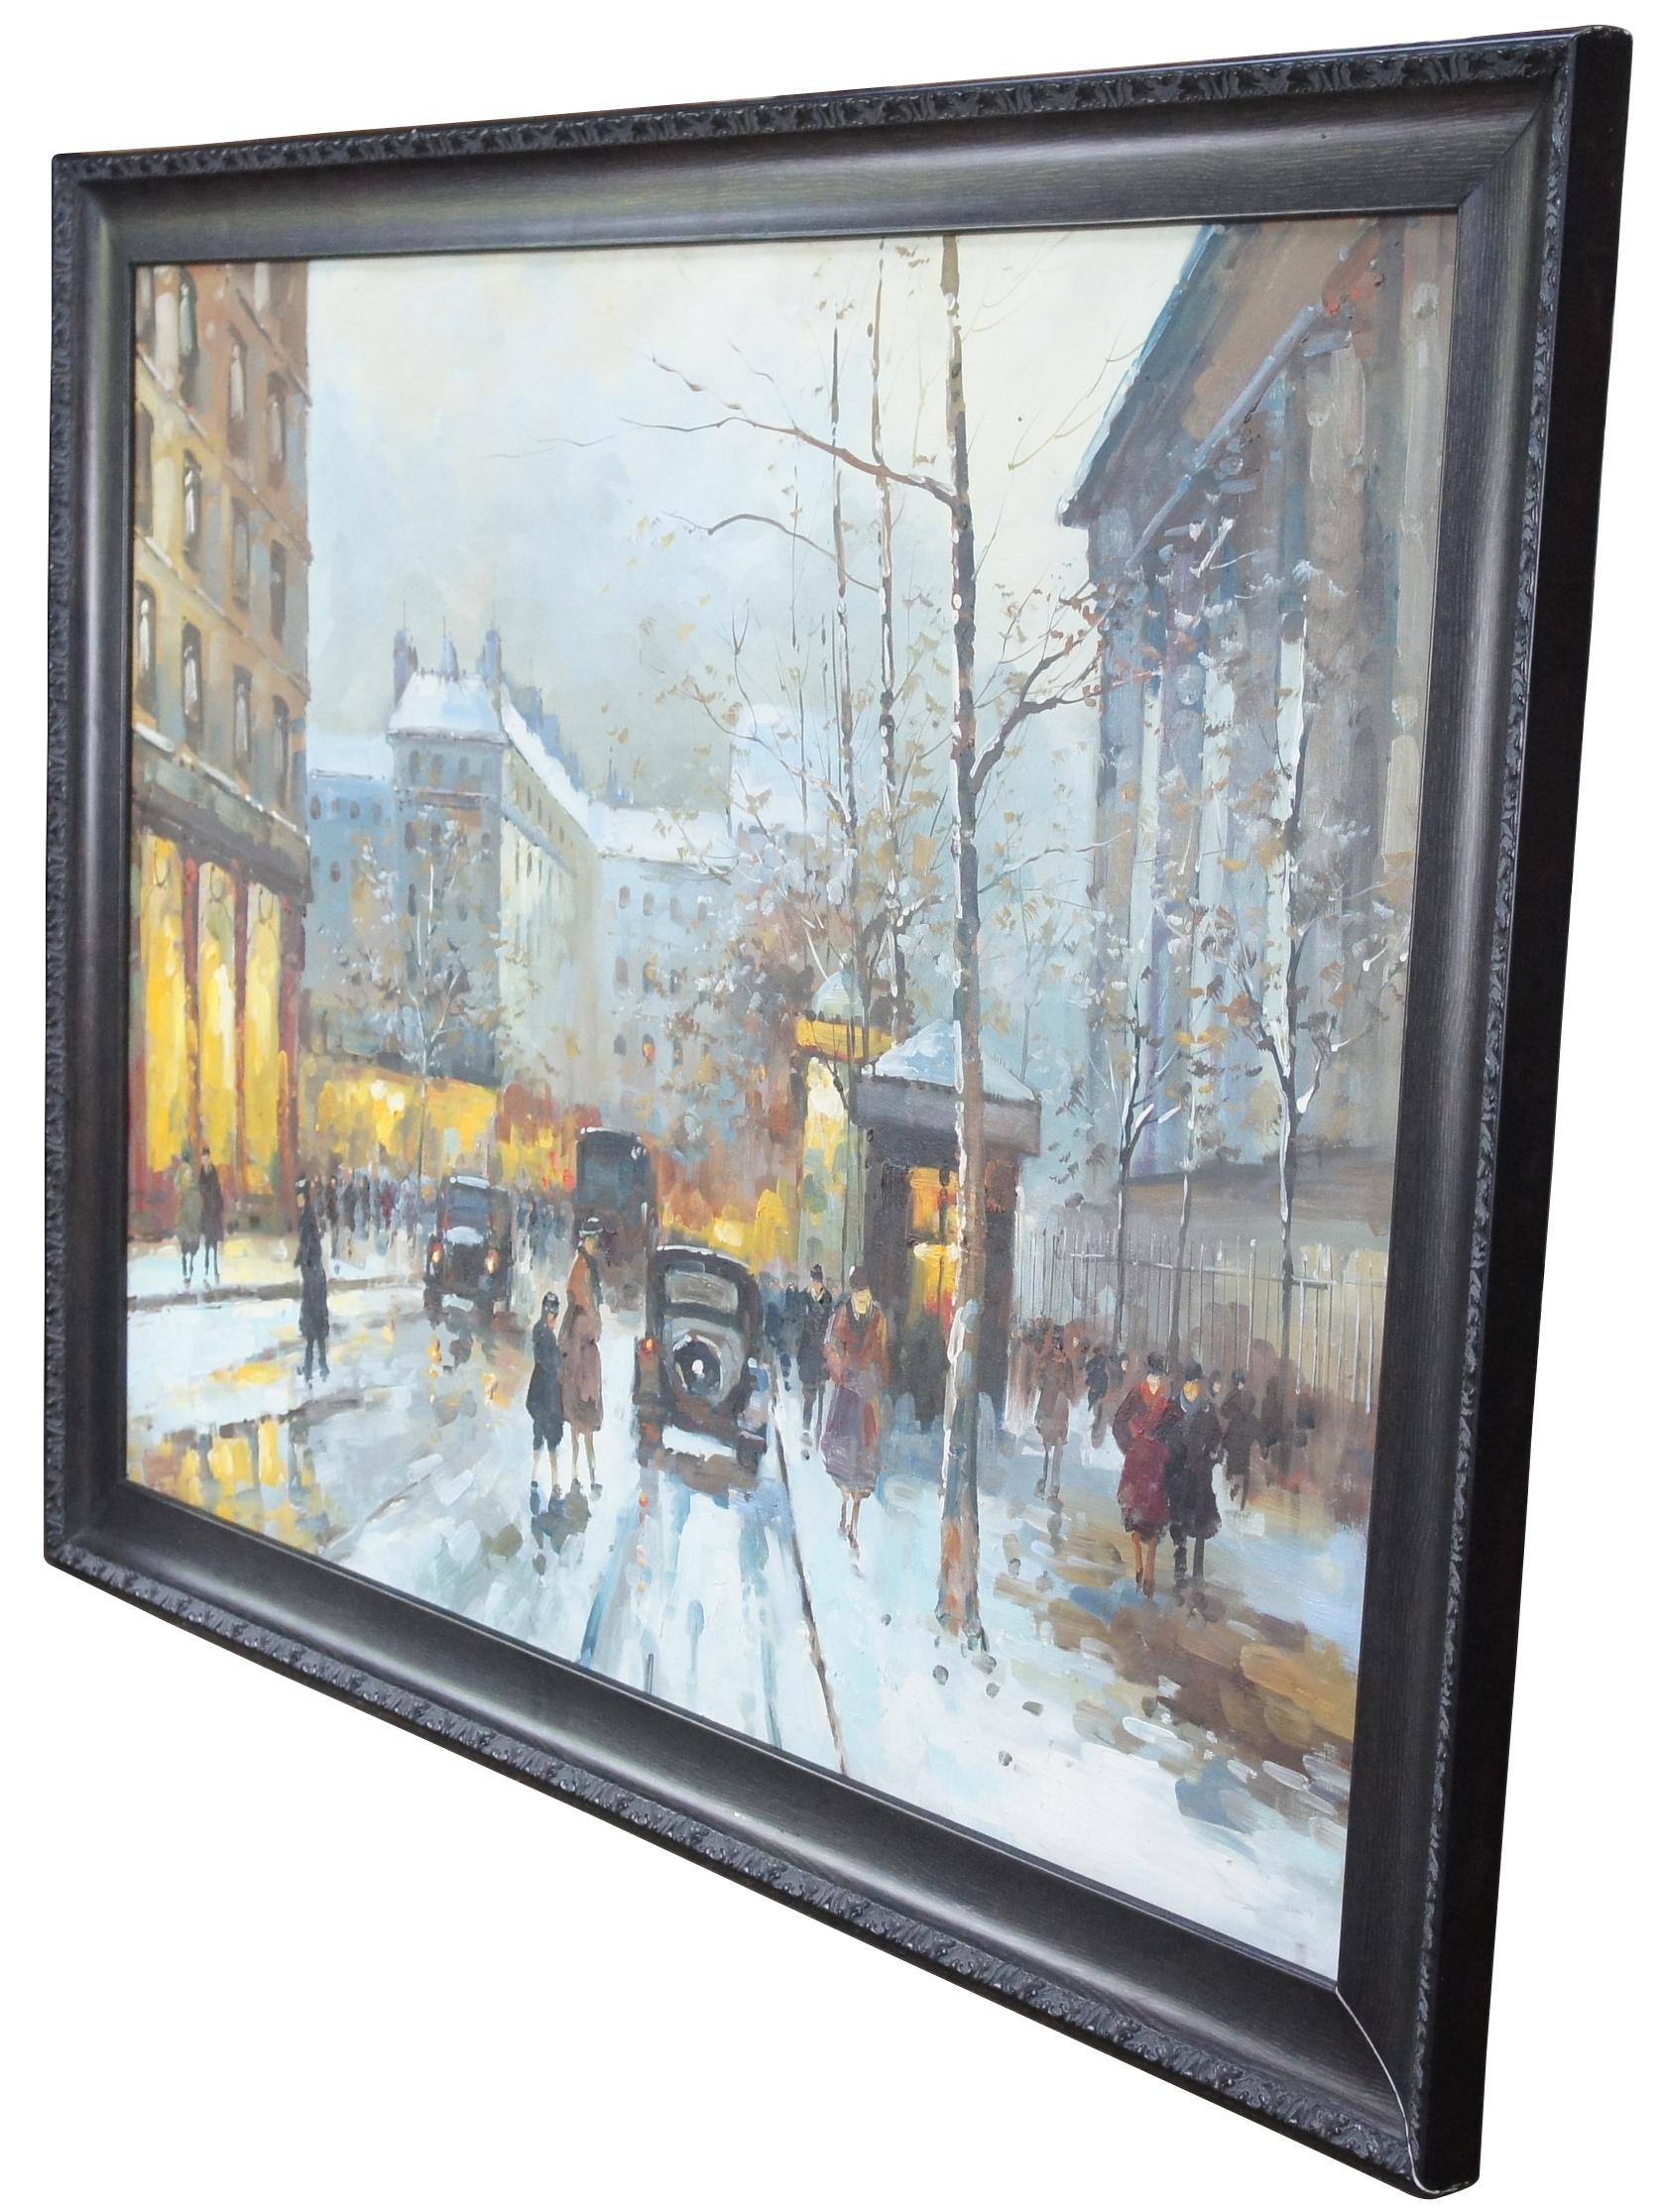 20th century impressionist cityscape, oil painting on canvas. Features a snowy evening in paris with people and cars amongst the architectural backdrop.

sans 47